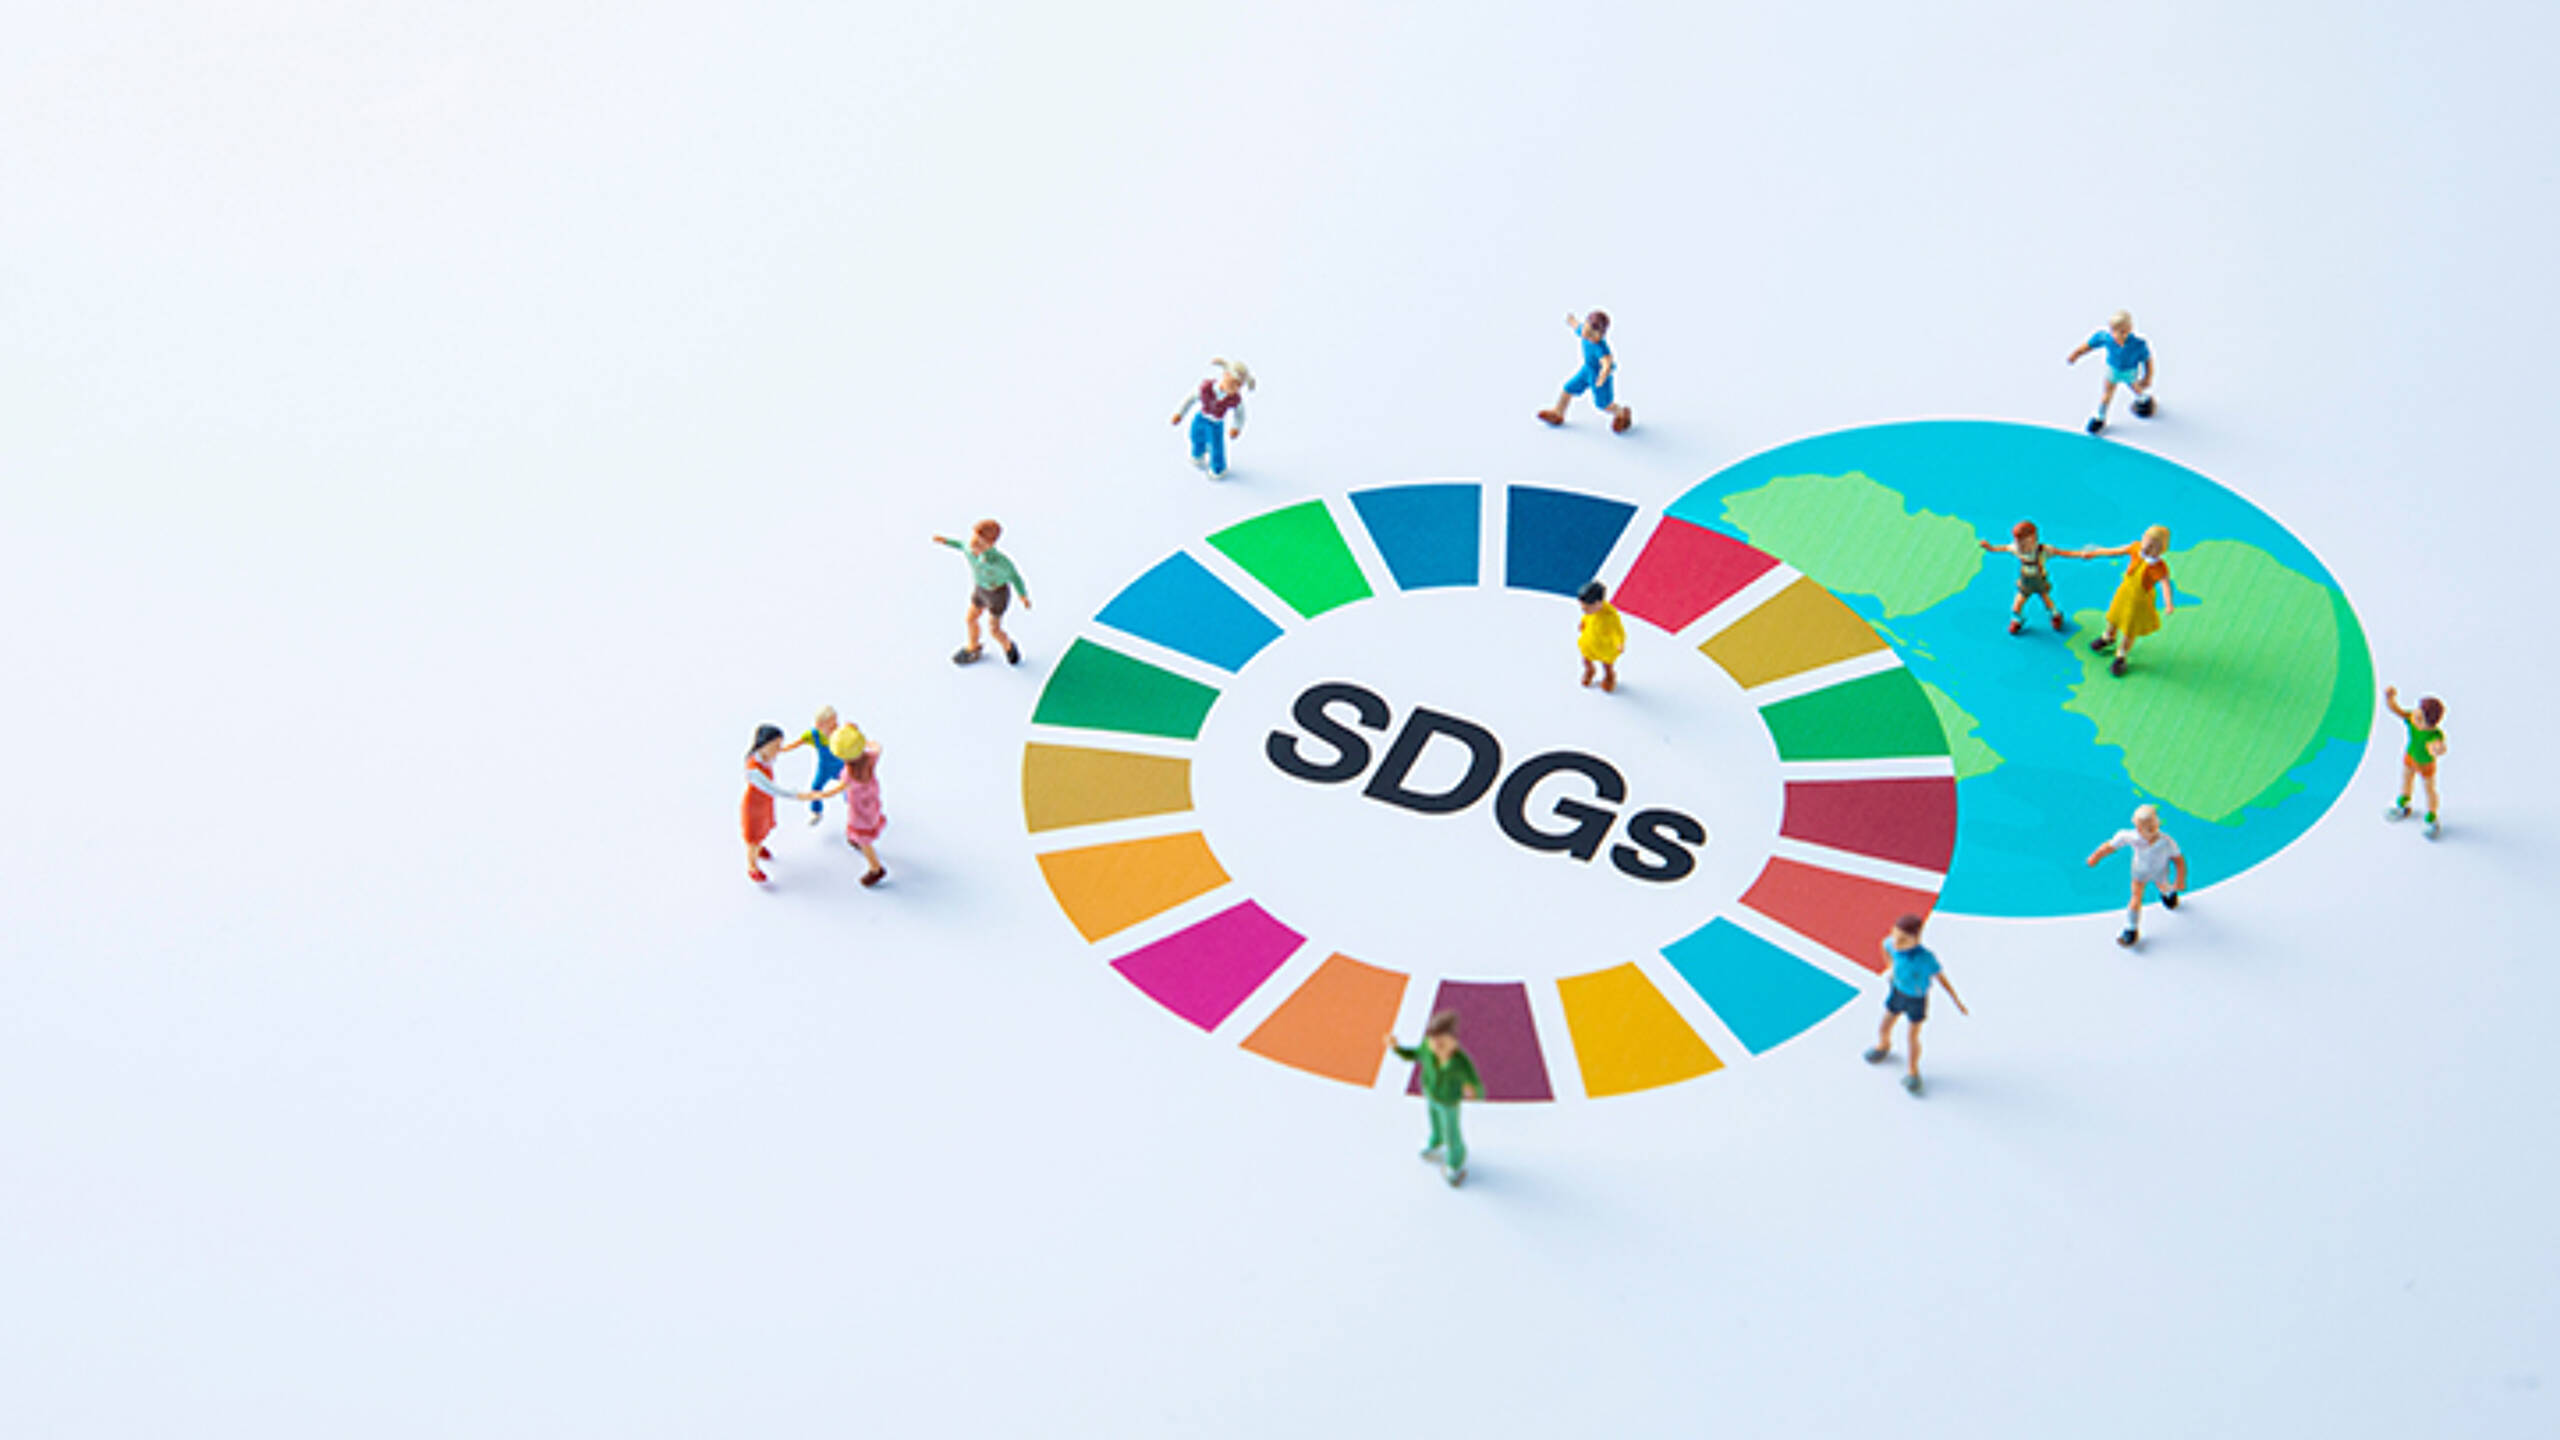 We cannot achieve the SDGs without accelerated commitment from the private sector